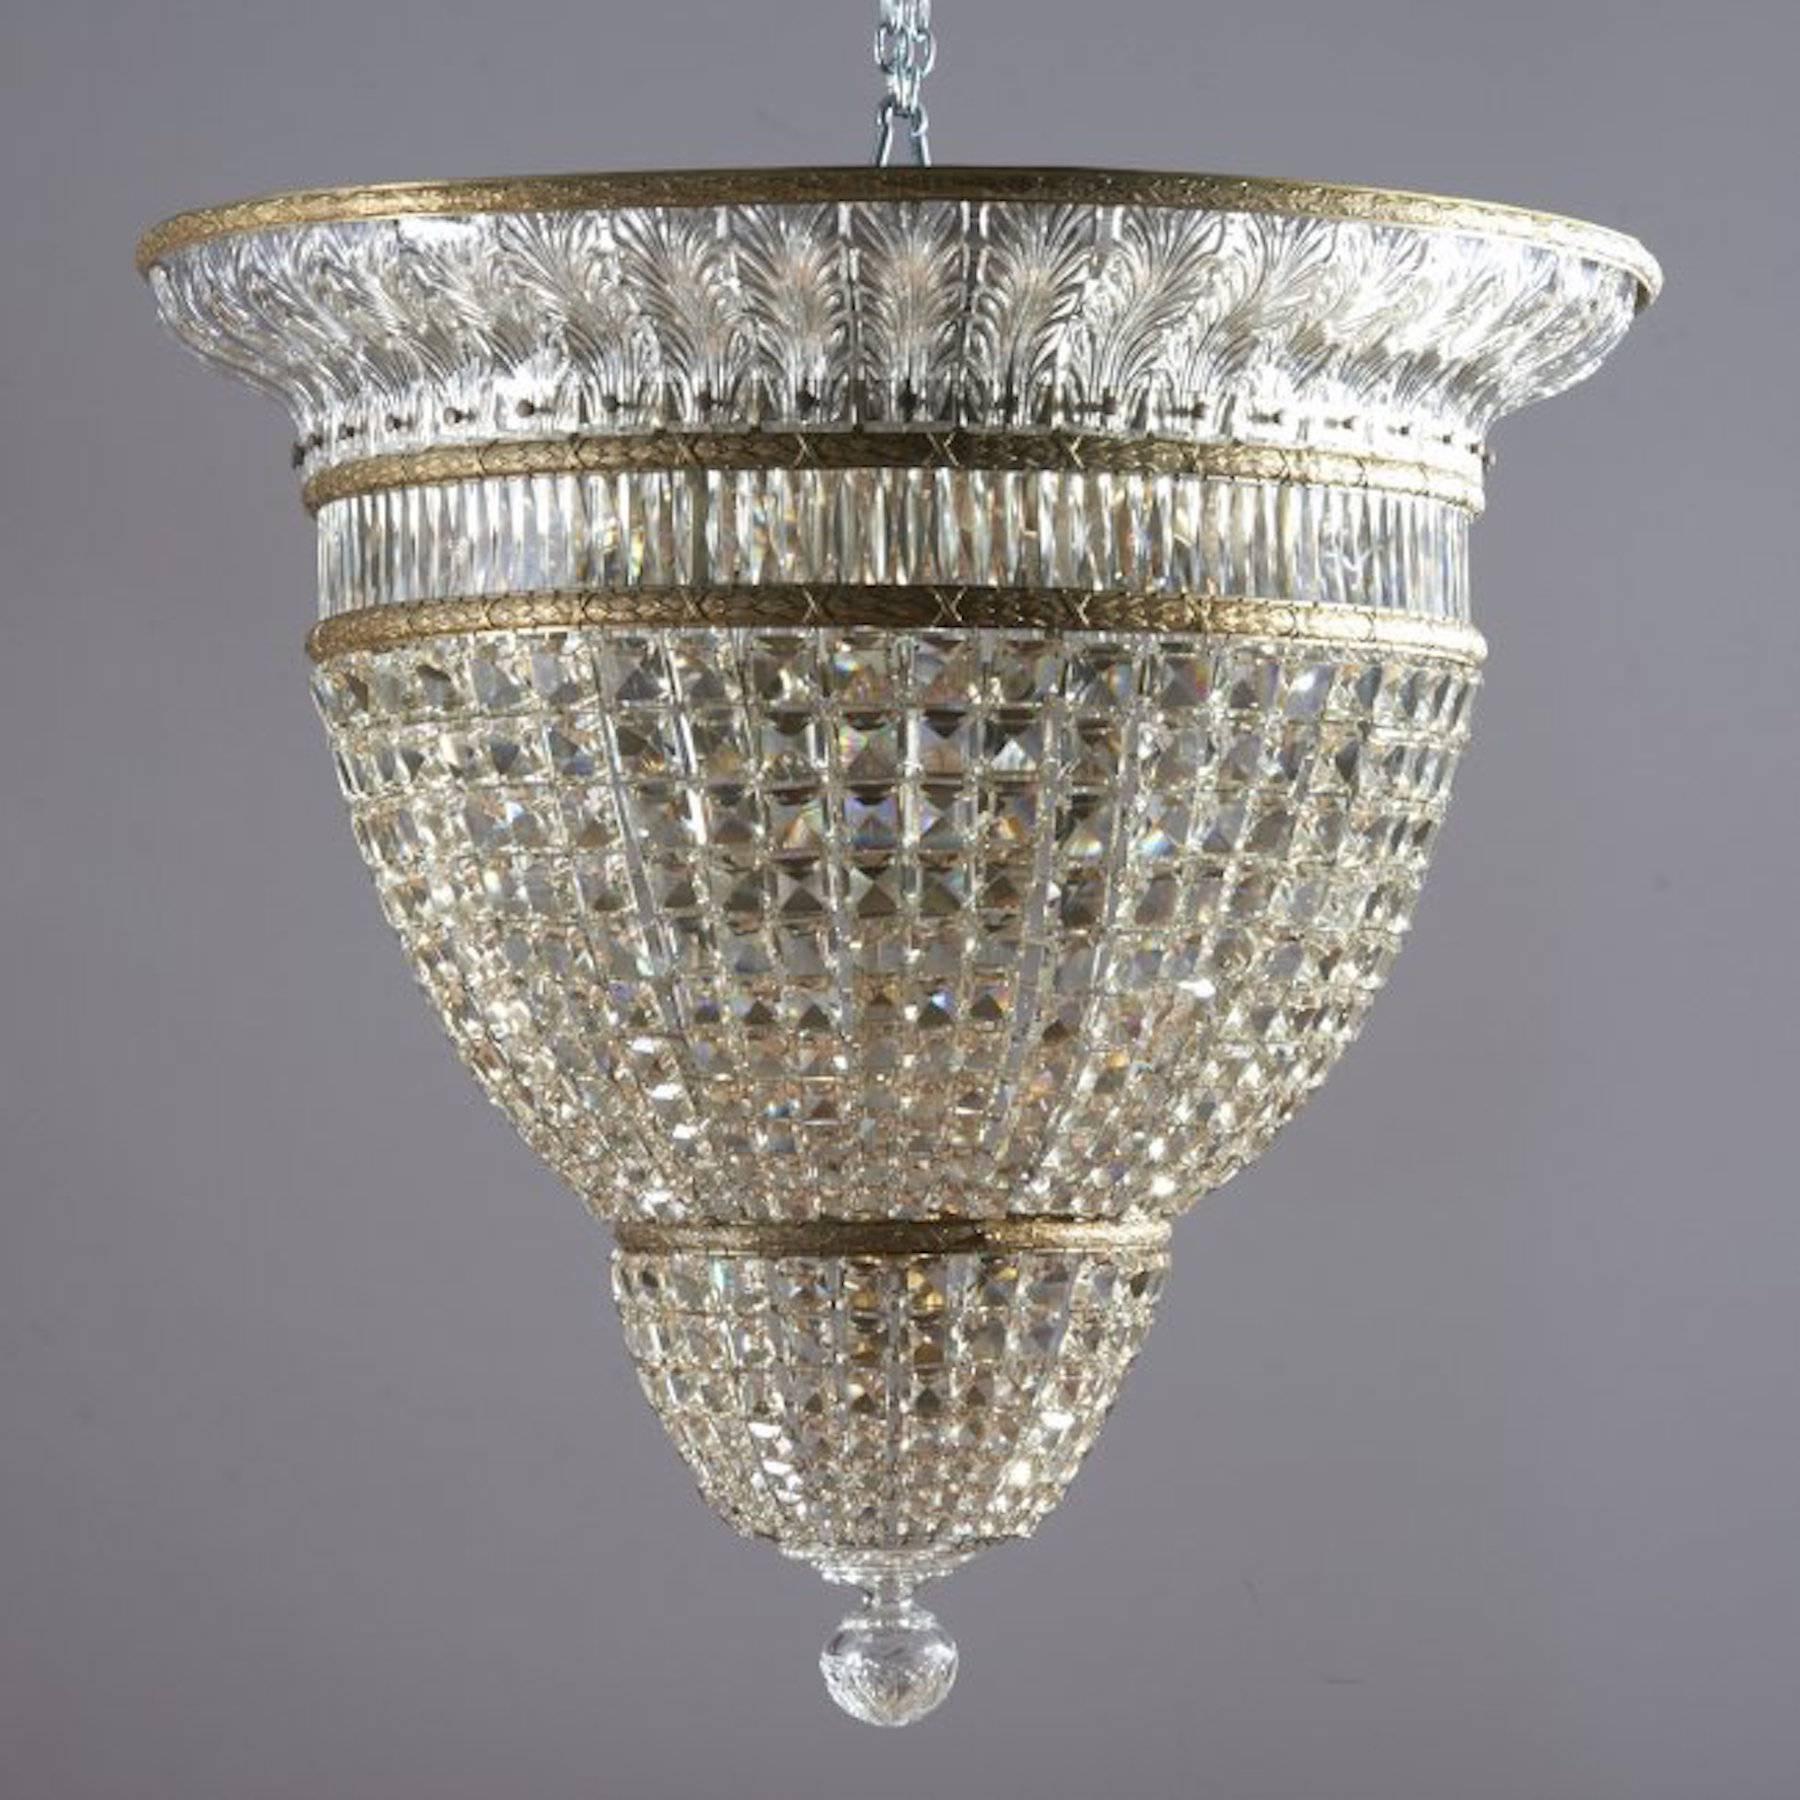 Pair of large Art Deco baccarat  Plafonniers (flush/ ceiling pendant)  crystal, gilt-bronze chandeliers tiered design with molded leaves and prism chains, each one 30